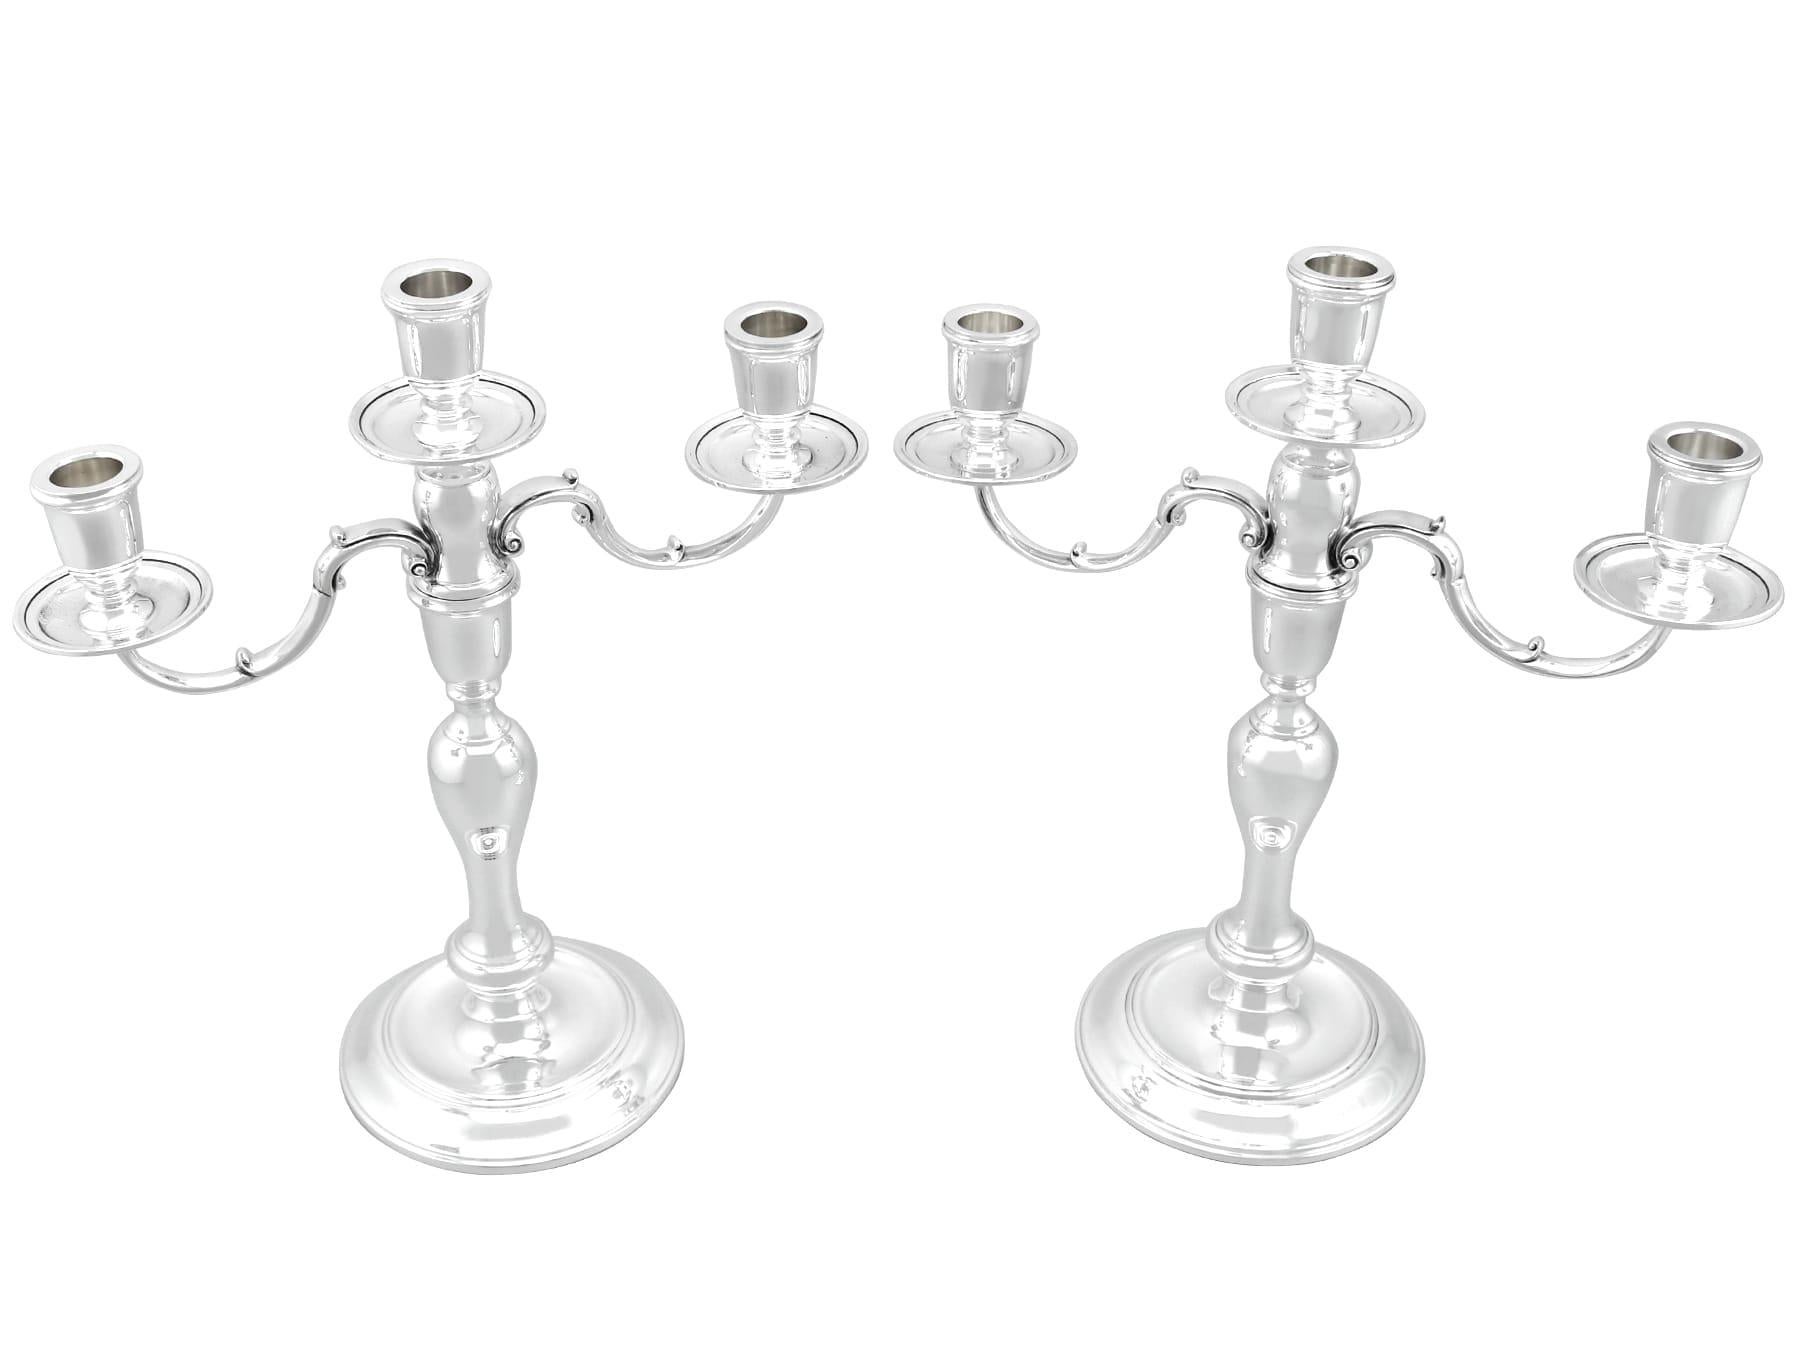 An exceptional, fine and impressive pair of vintage Elizabeth II English sterling silver three light candelabra; an addition to our ornamental silverware collection

These exceptional vintage silver candelabra, in sterling standard, have a